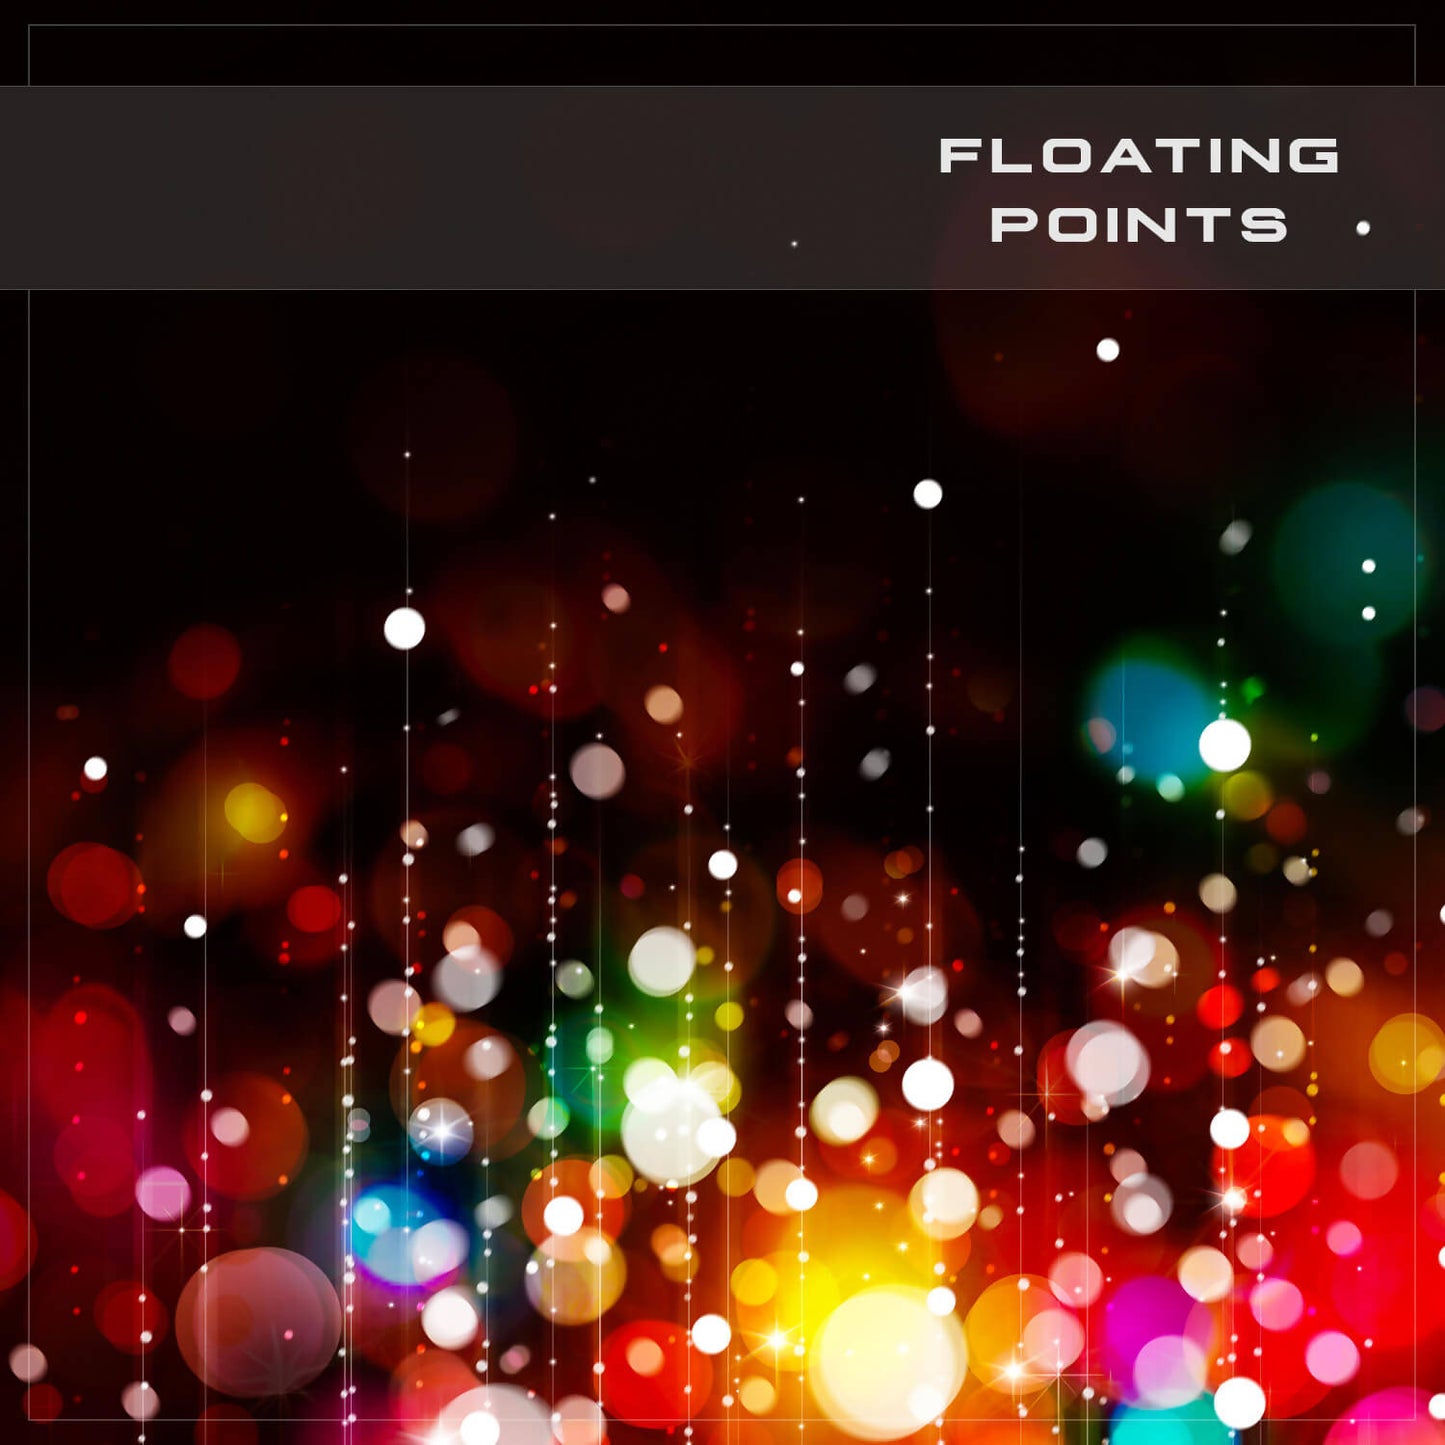 120 DSaudio thorn presets - Floating points volume 1 - highly atmospheric and ambient sounds featuring futuristic synth sounds including deep dub grooves, morphing wavetable sounds, synth plucks, formant style pad presets, crystal bells, dreamy arpeggiated sounds, space age pads